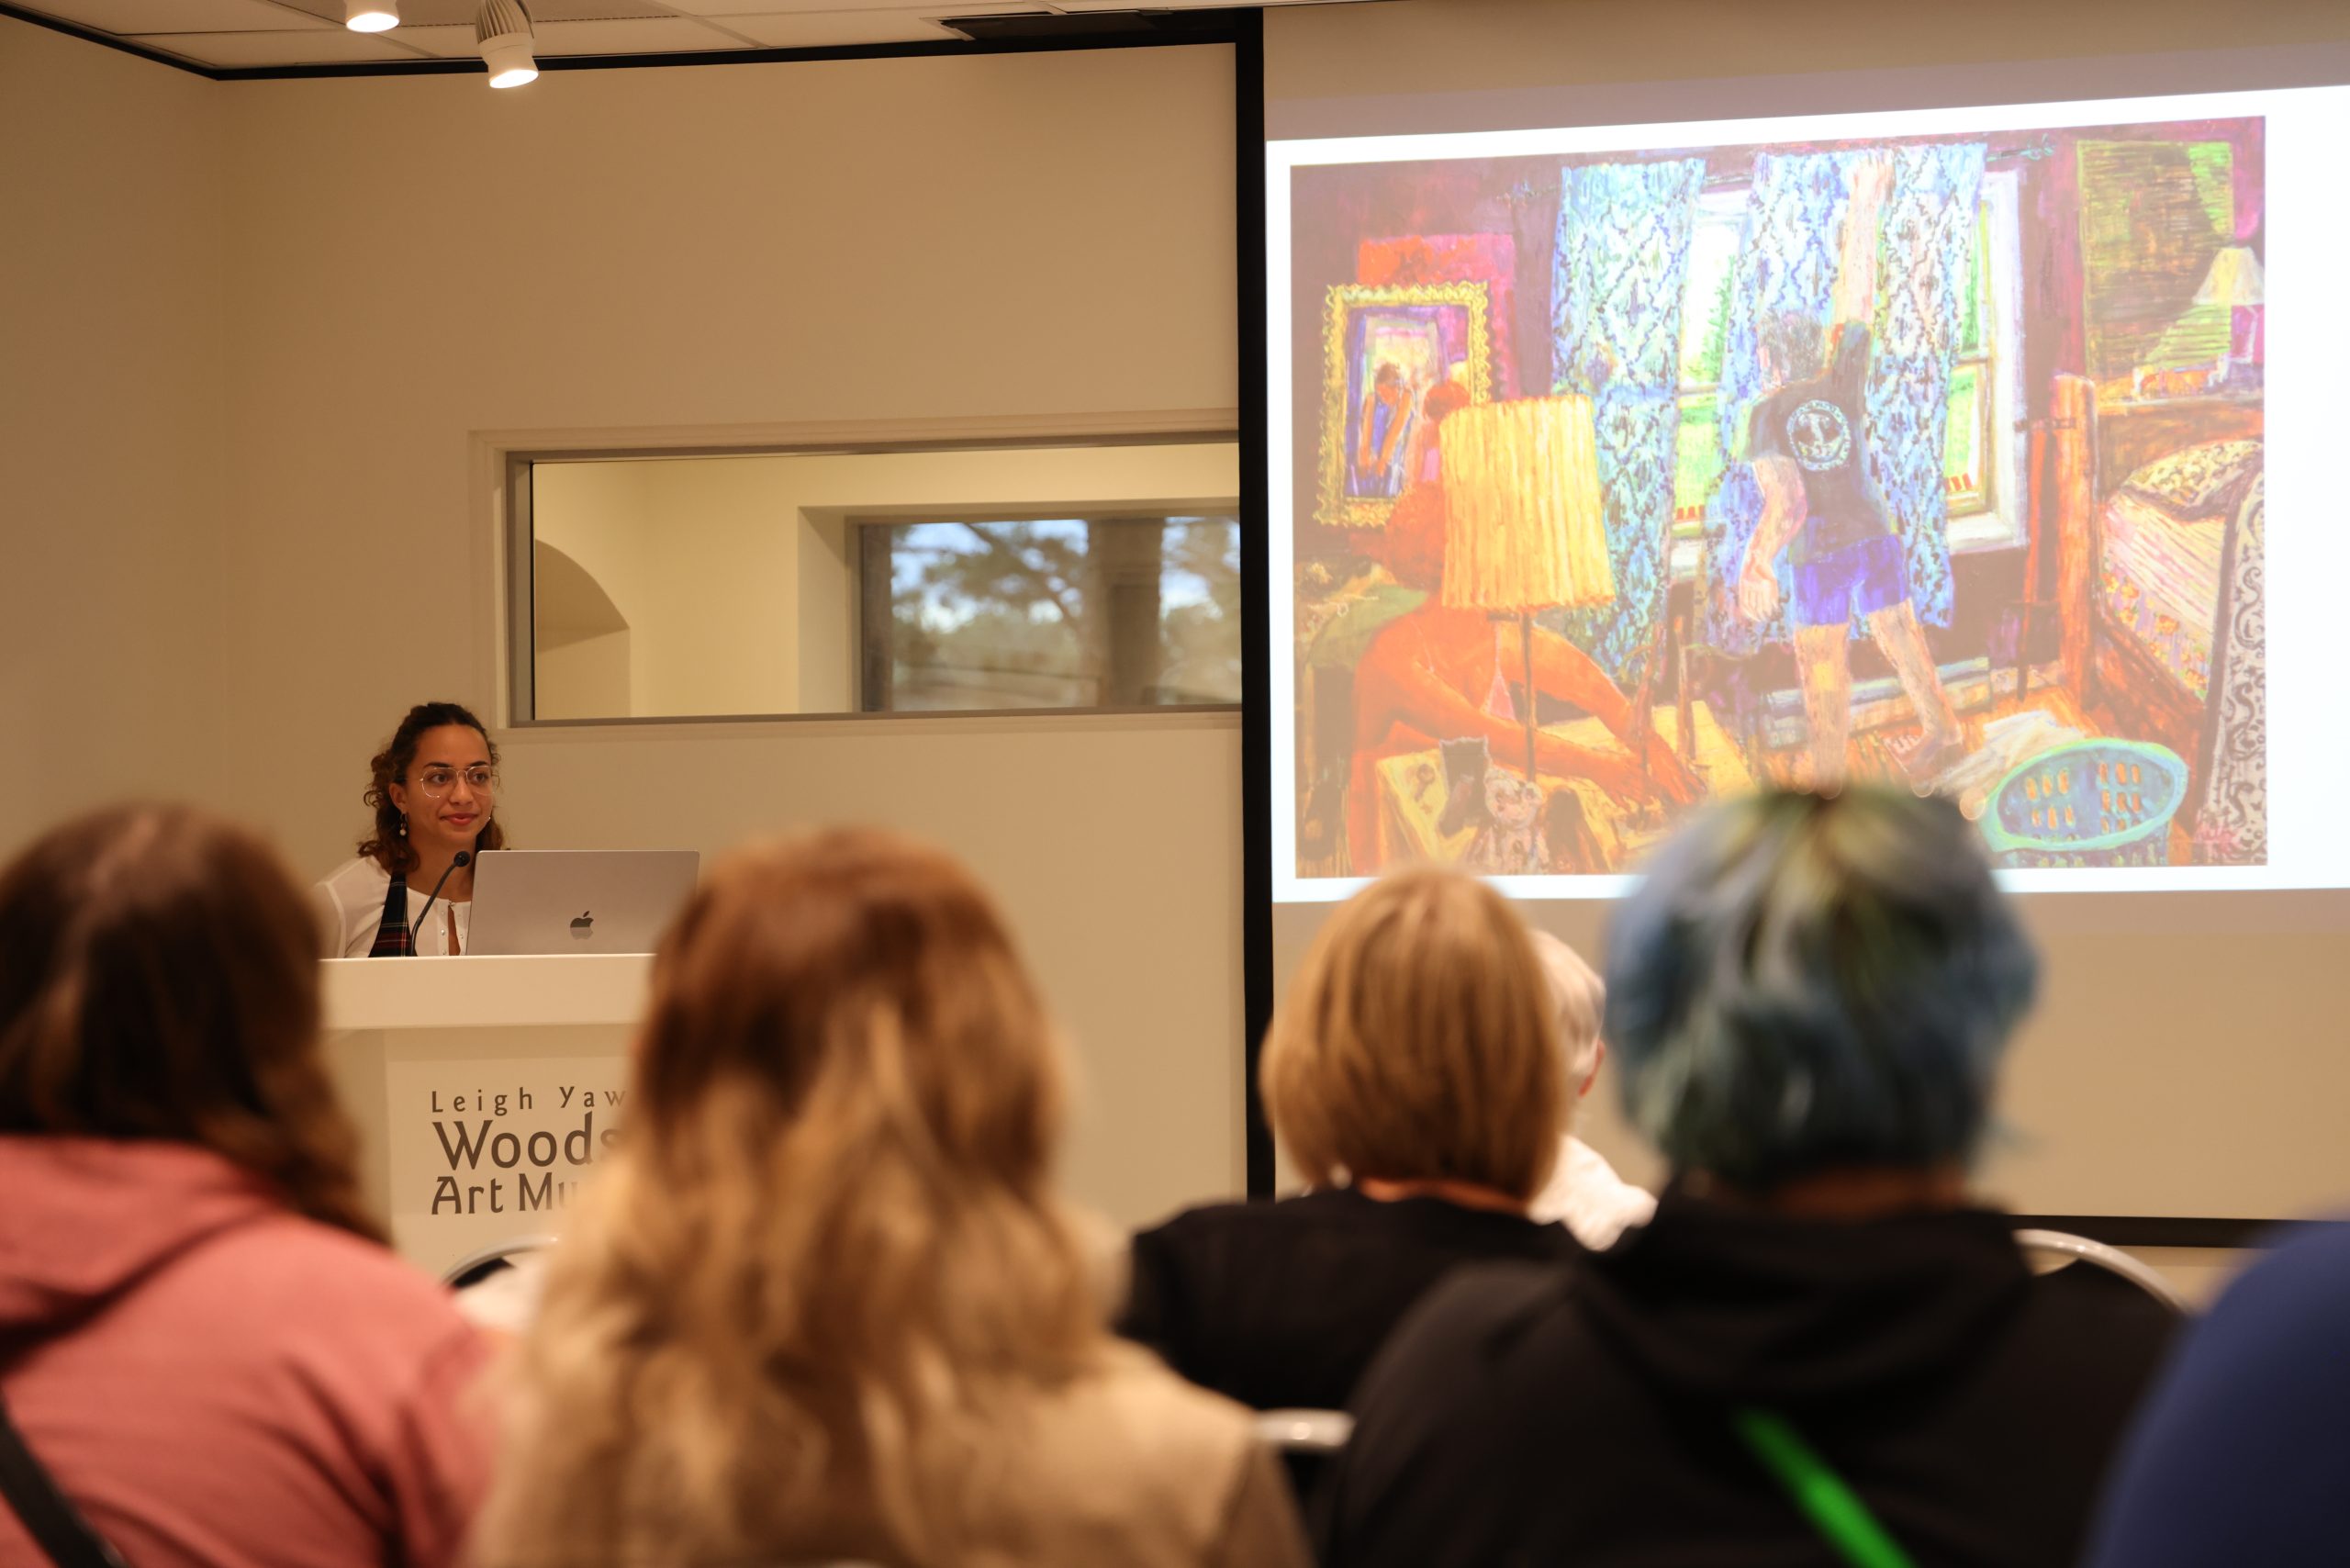 Ariana Vaeth stands behind a podium to the left of a projector screen. She is giving an artist talk about her work in the Museum's classroom space. The screen depicts a painting of hers with lots of colorful patterns and a figure reaching upwards. 